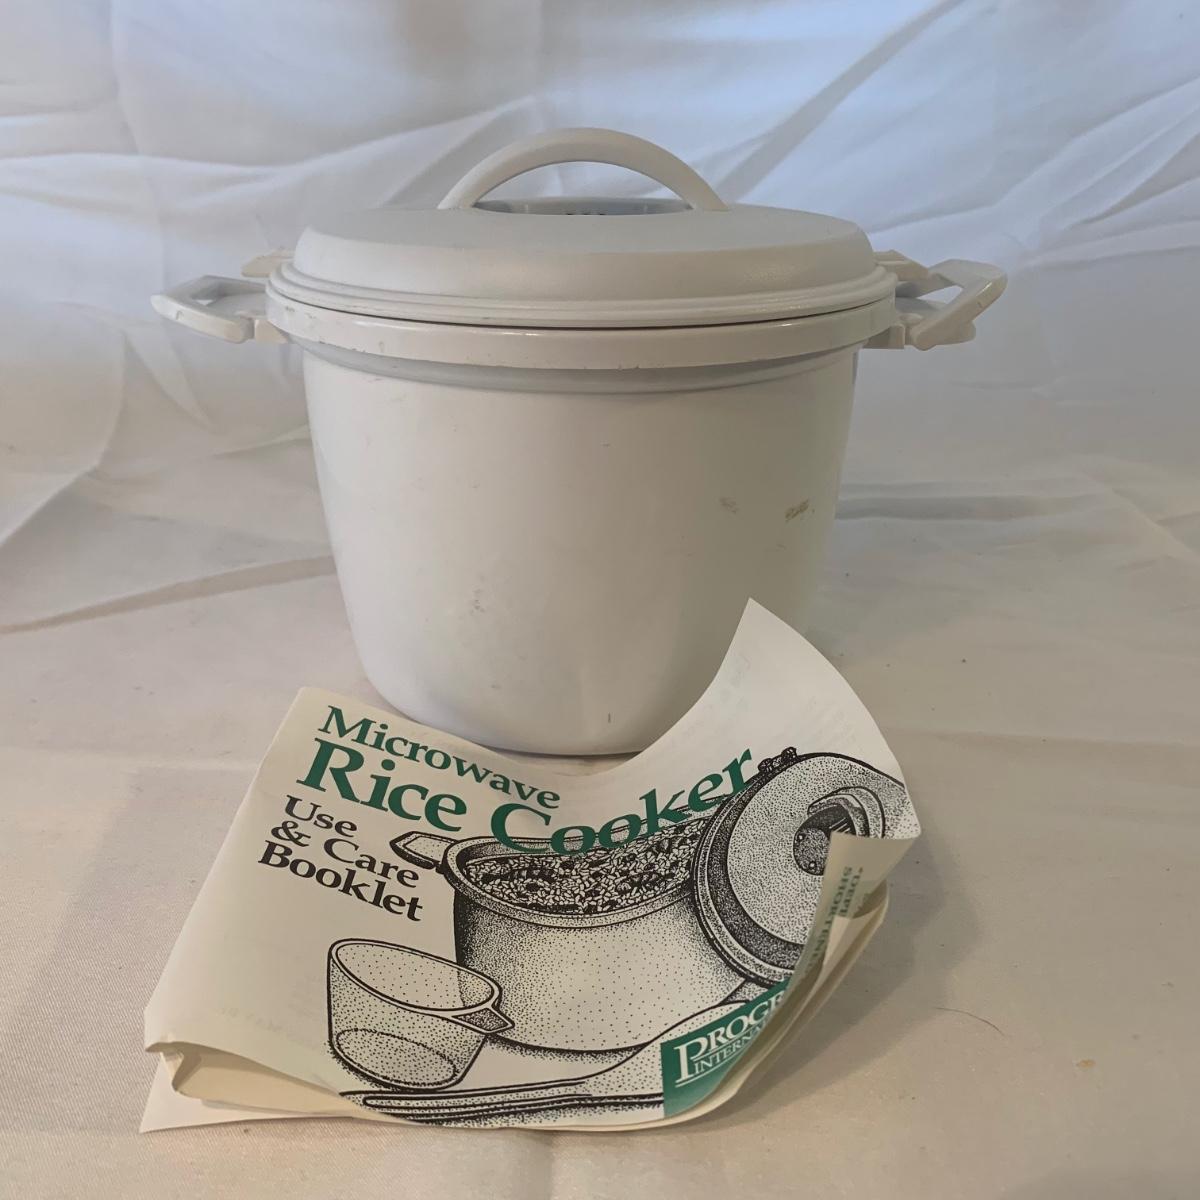 Wolfgang Puck 10-Cup Rice Cooker with Removable Lid at